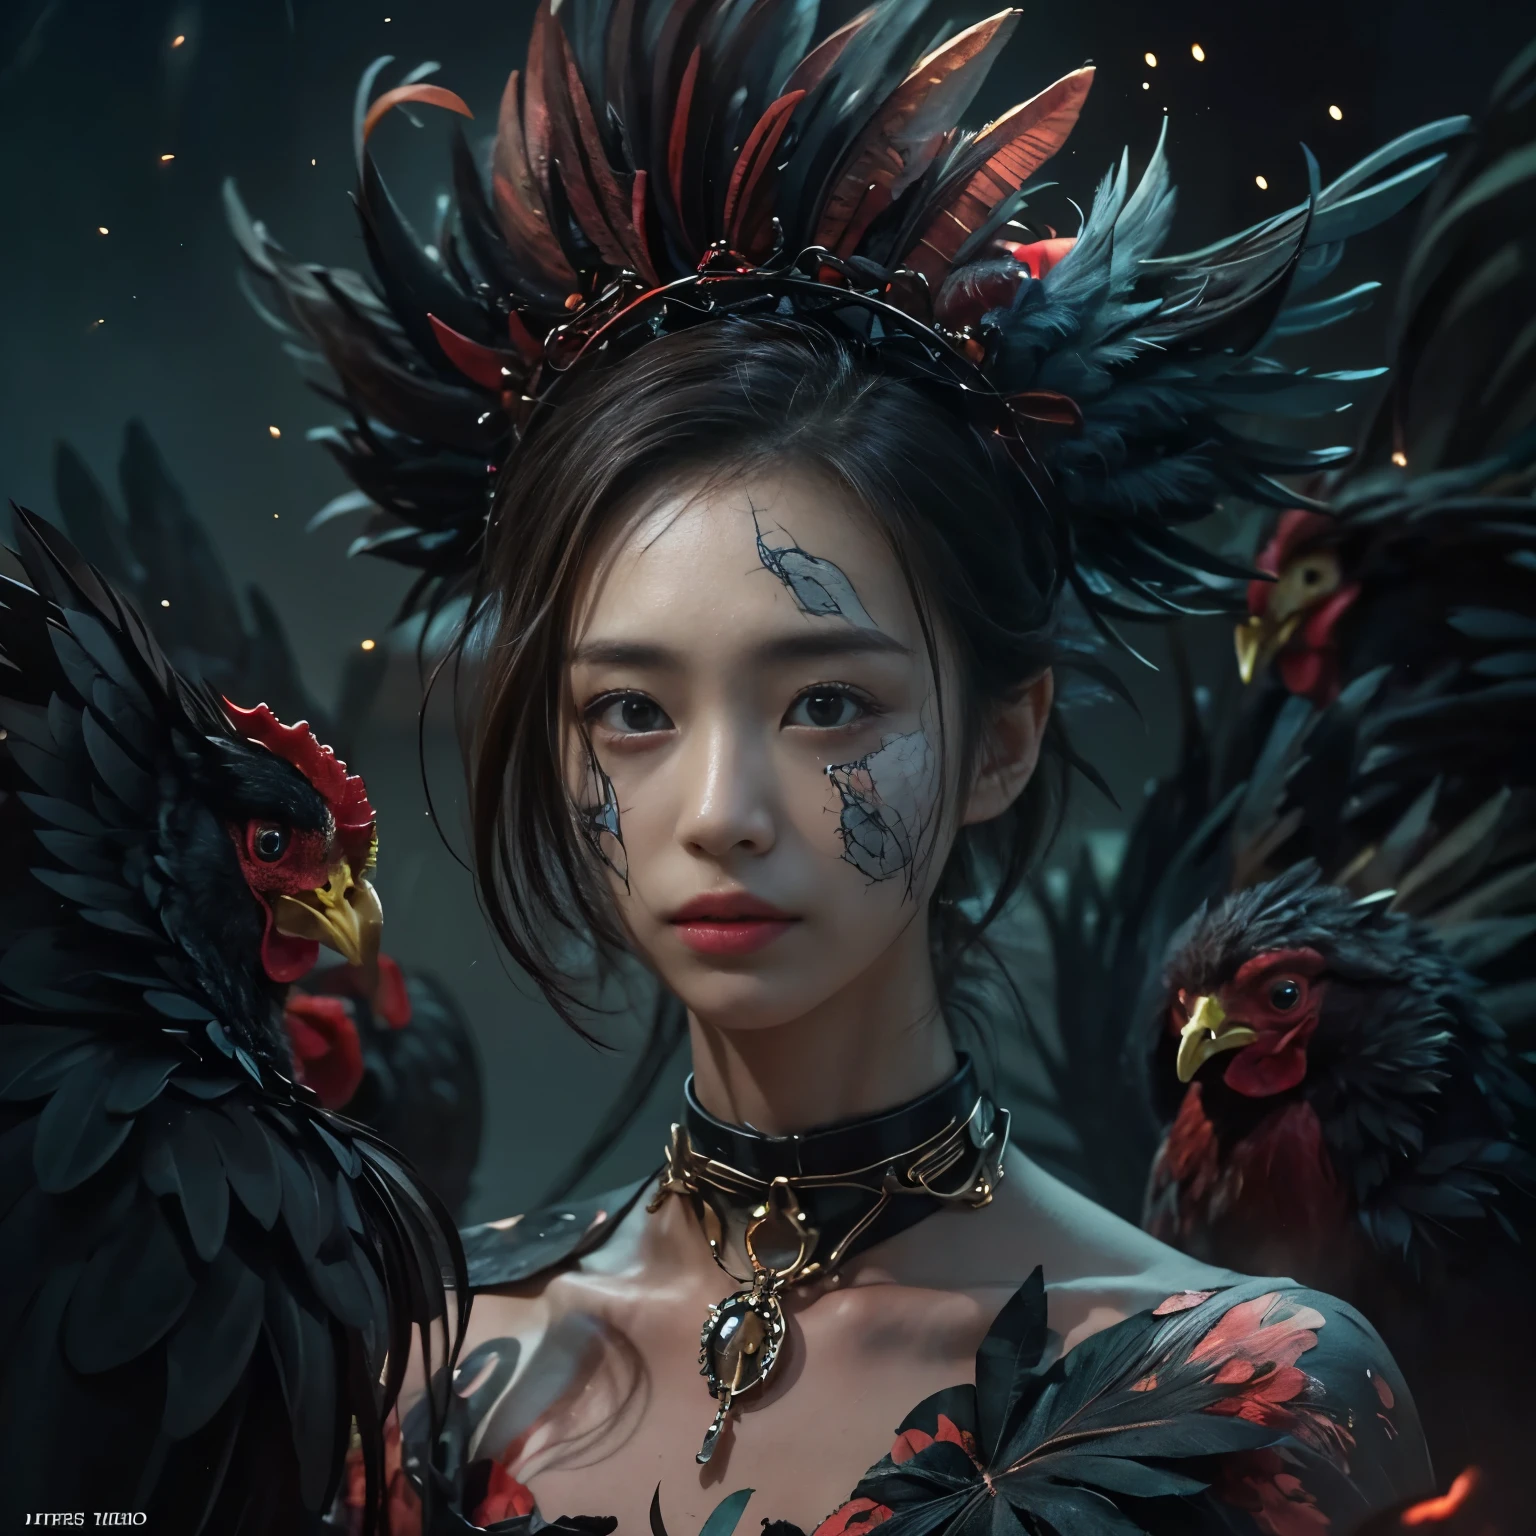 (highest quality、Super detailed、Real:1.37)、(professional、Bright colors)、(Dark fantasy)、((Human-faced chicken:1.5))、（Human-chicken hybrid creature)、(Apparition)、(The face of a young and extremely beautiful woman:1.4)、(Beautiful detailed eyes、Beautiful detailed lips、Highly detailed eyes and face)、(Dark Night Road、Dimly lit road)、(media: oil)、(Fine feather detail、Captivating colorysterious atmosphere)、(Studio Lighting)